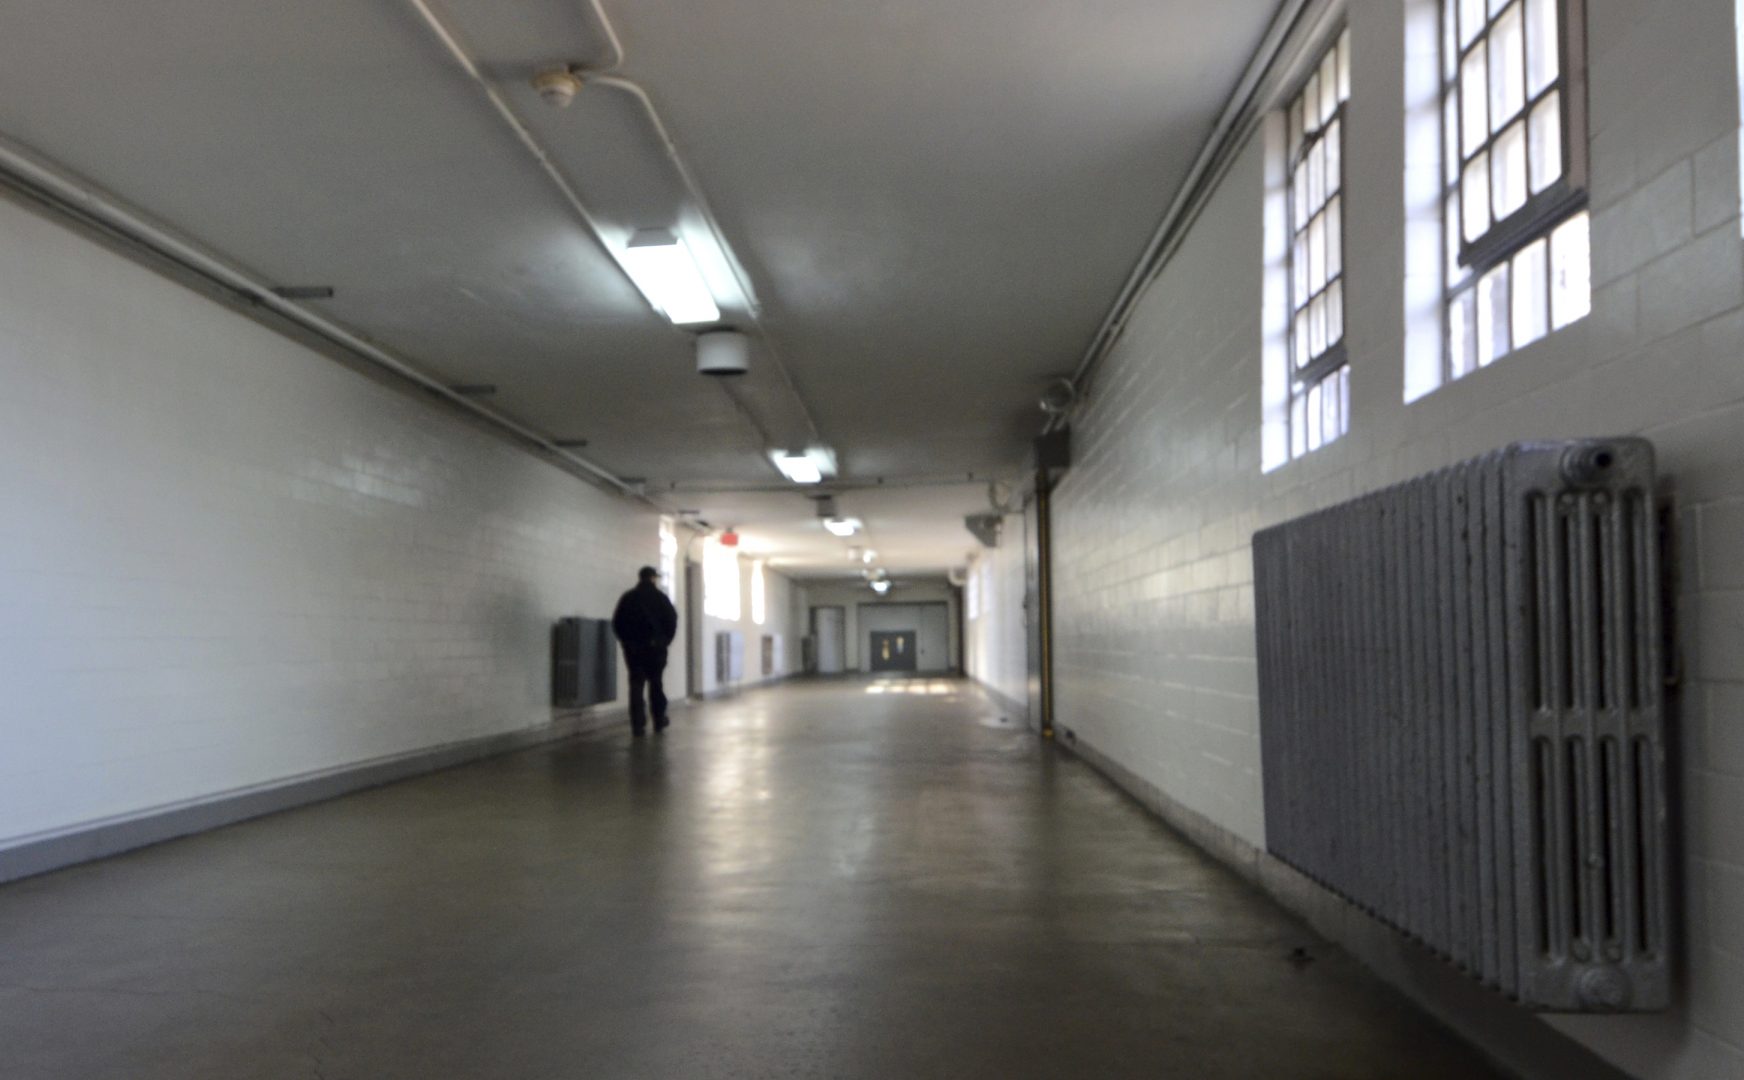 FILE PHOTO: A corrections officer walks down a hallway in a building at the State Correctional Institution at Camp Hill, Pennsylvania, on Jan. 13, 2017, in Camp Hill, Pa.